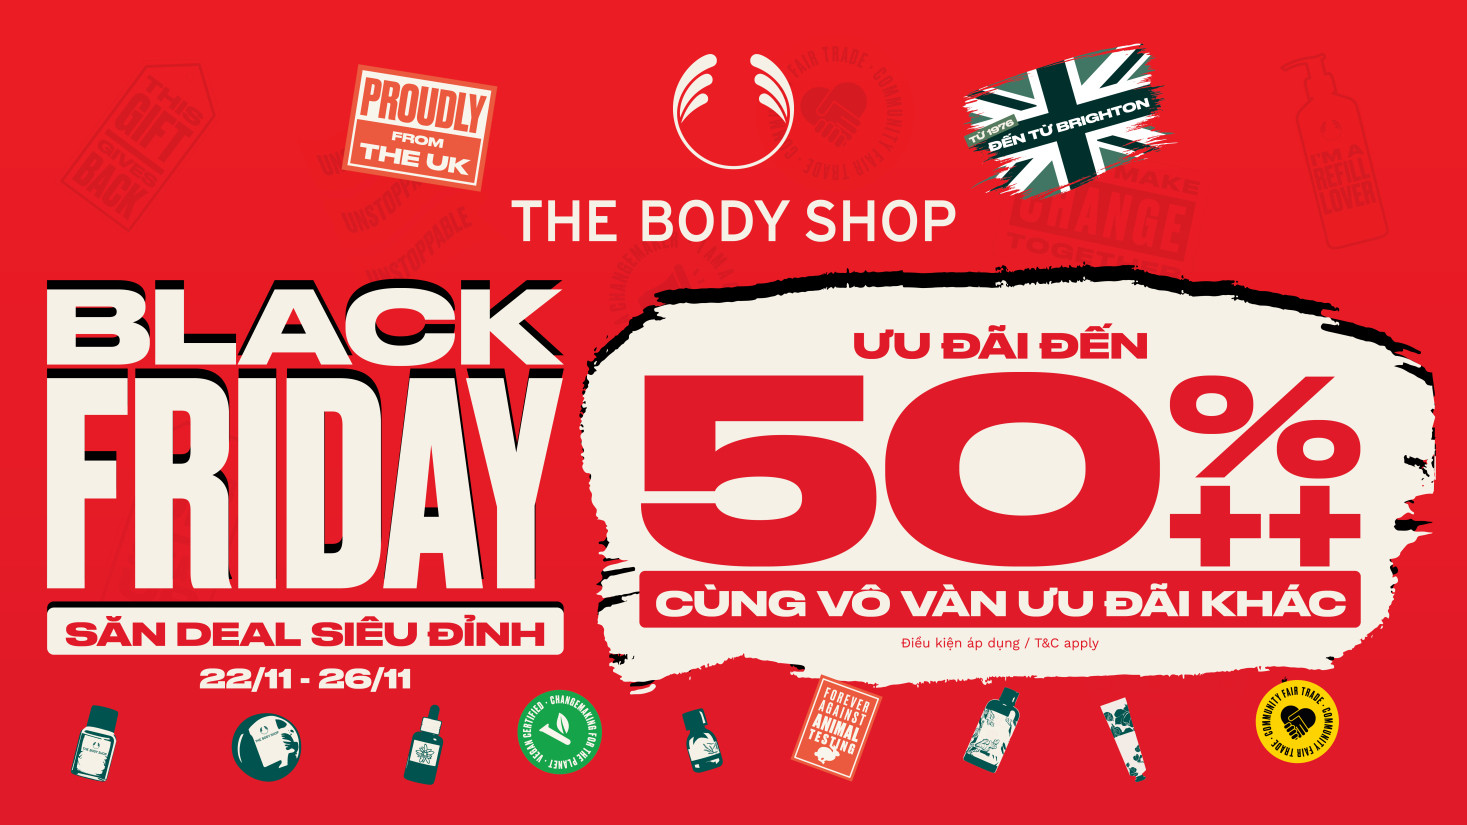 BLACK FRIDAY IS FINALLY HERE – THE BODY SHOP SALE UP TO 50%